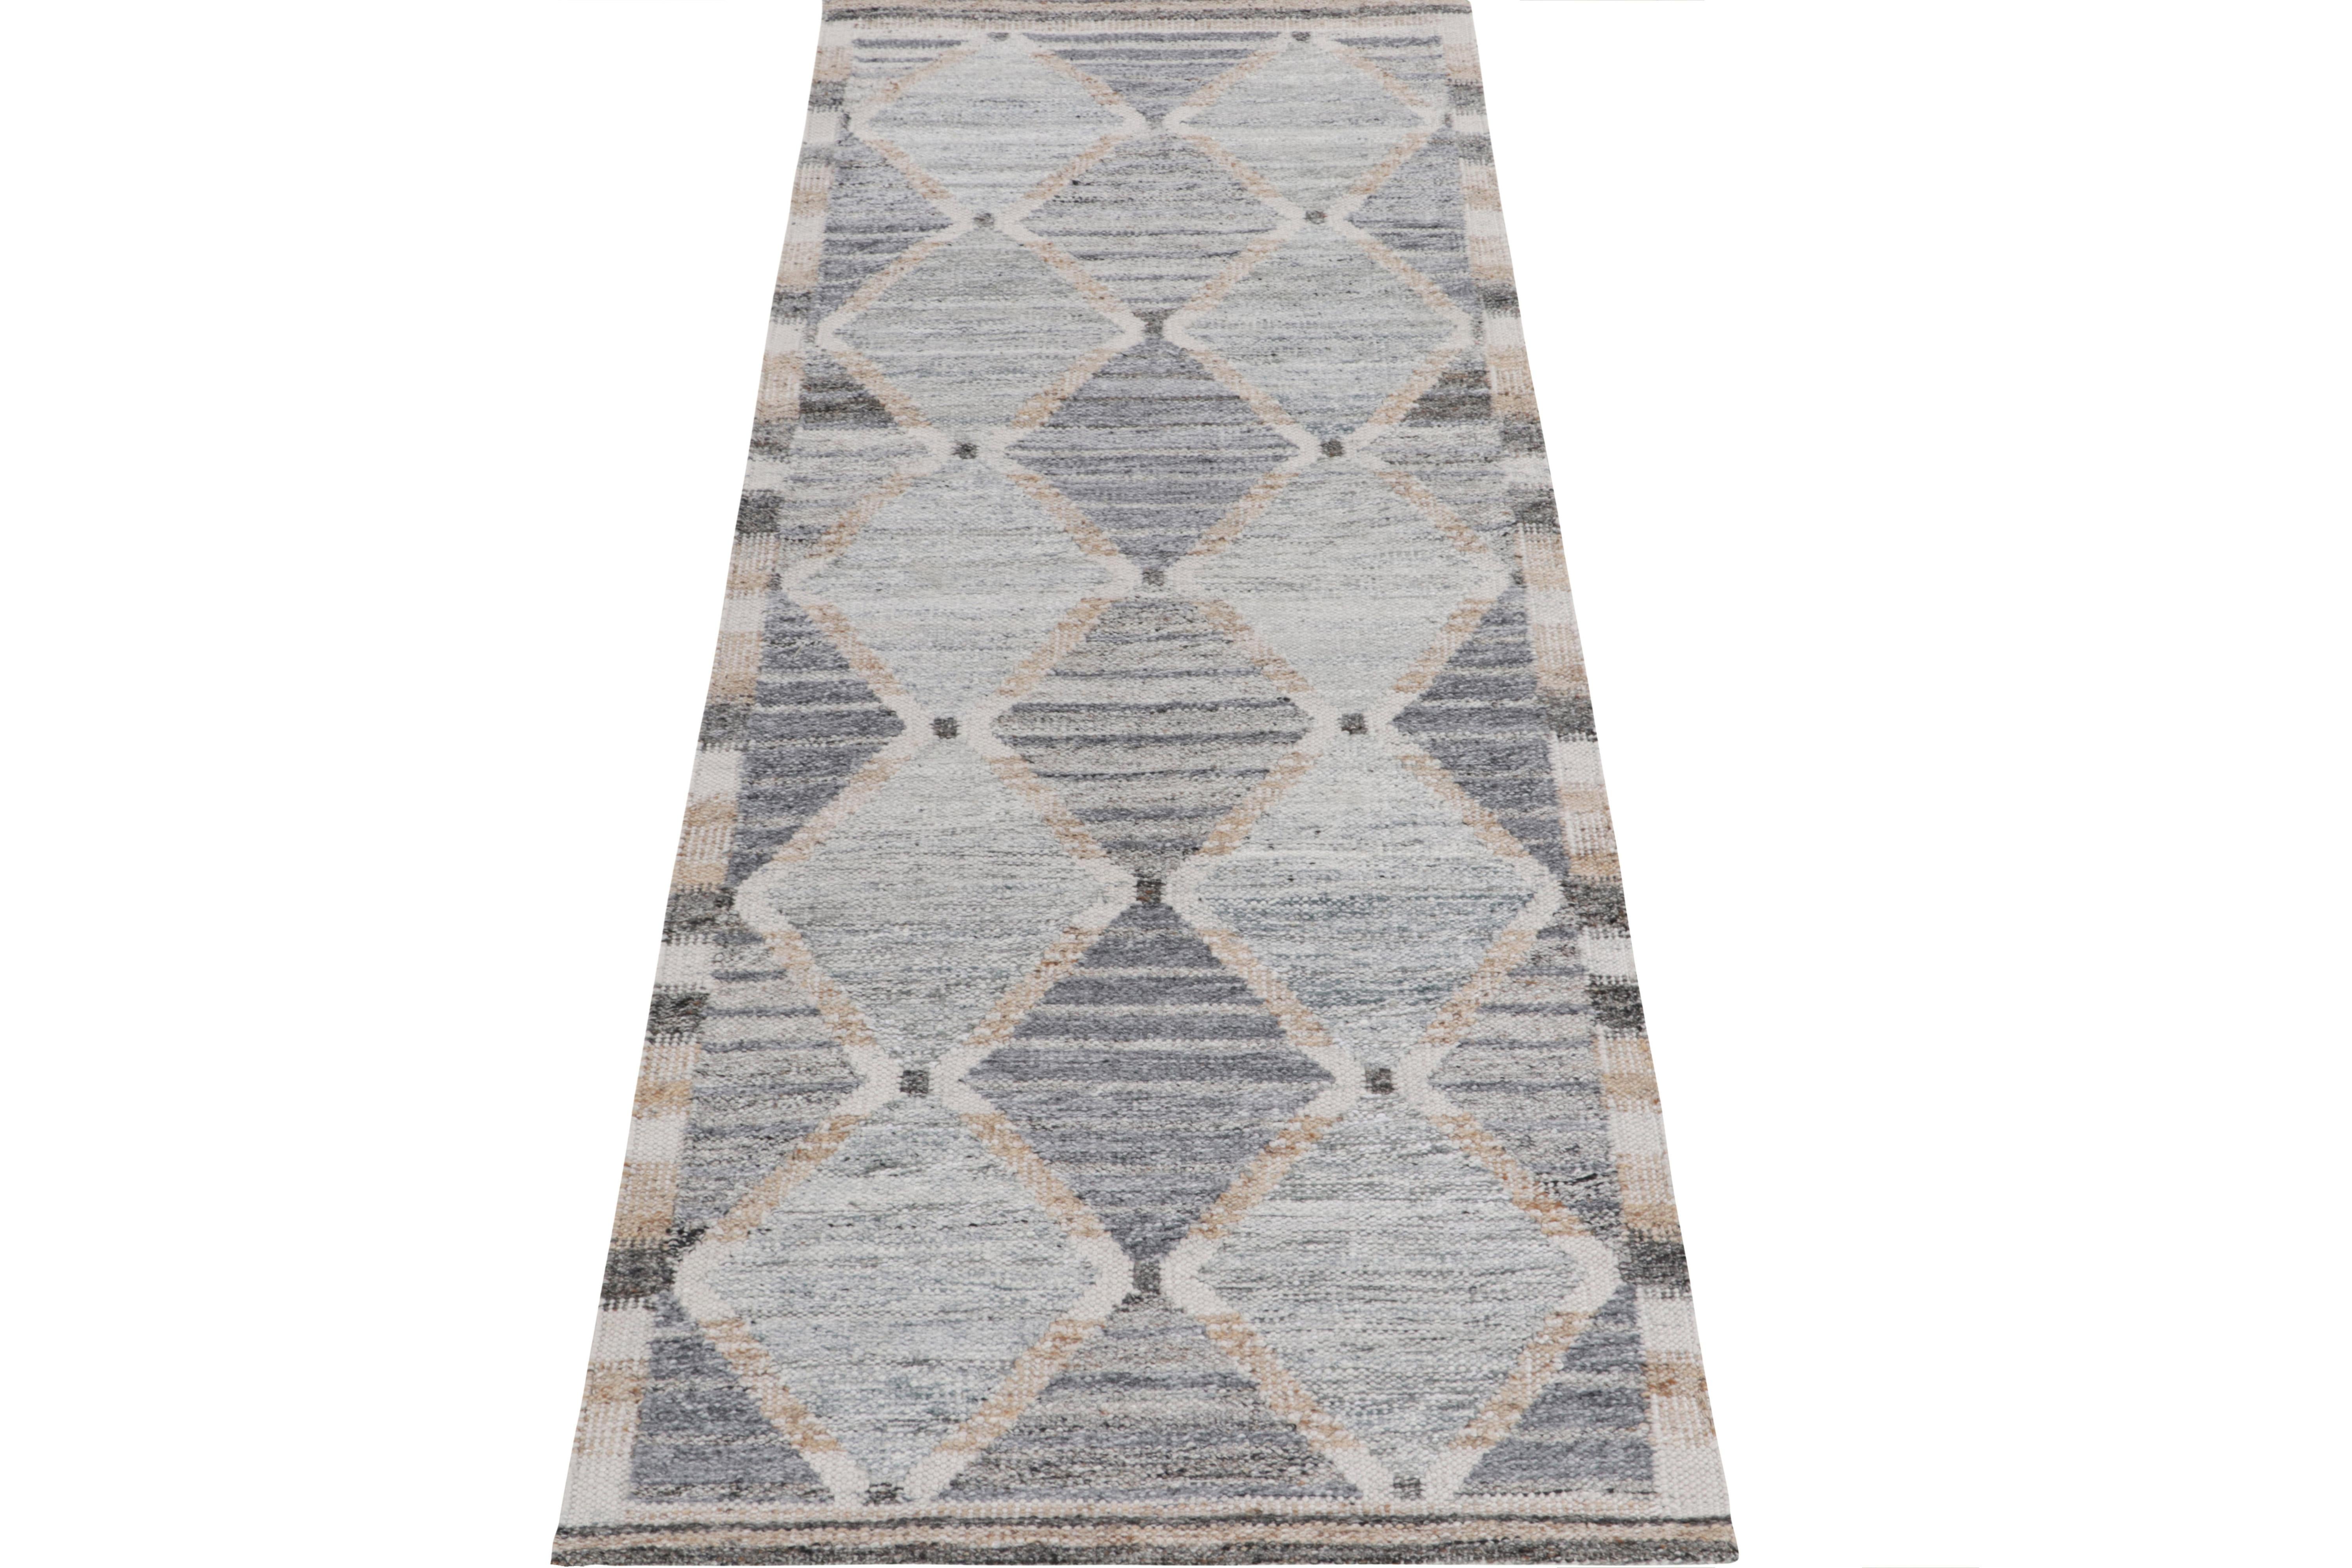 A 3x8 flat weave from Rug & Kilim’s Scandinavian Collection, joining the exciting indoor-outdoor texture of this award-winning construction. The runner carries a cool composure with soothing tones of blue and gray covering the scale with a clean &